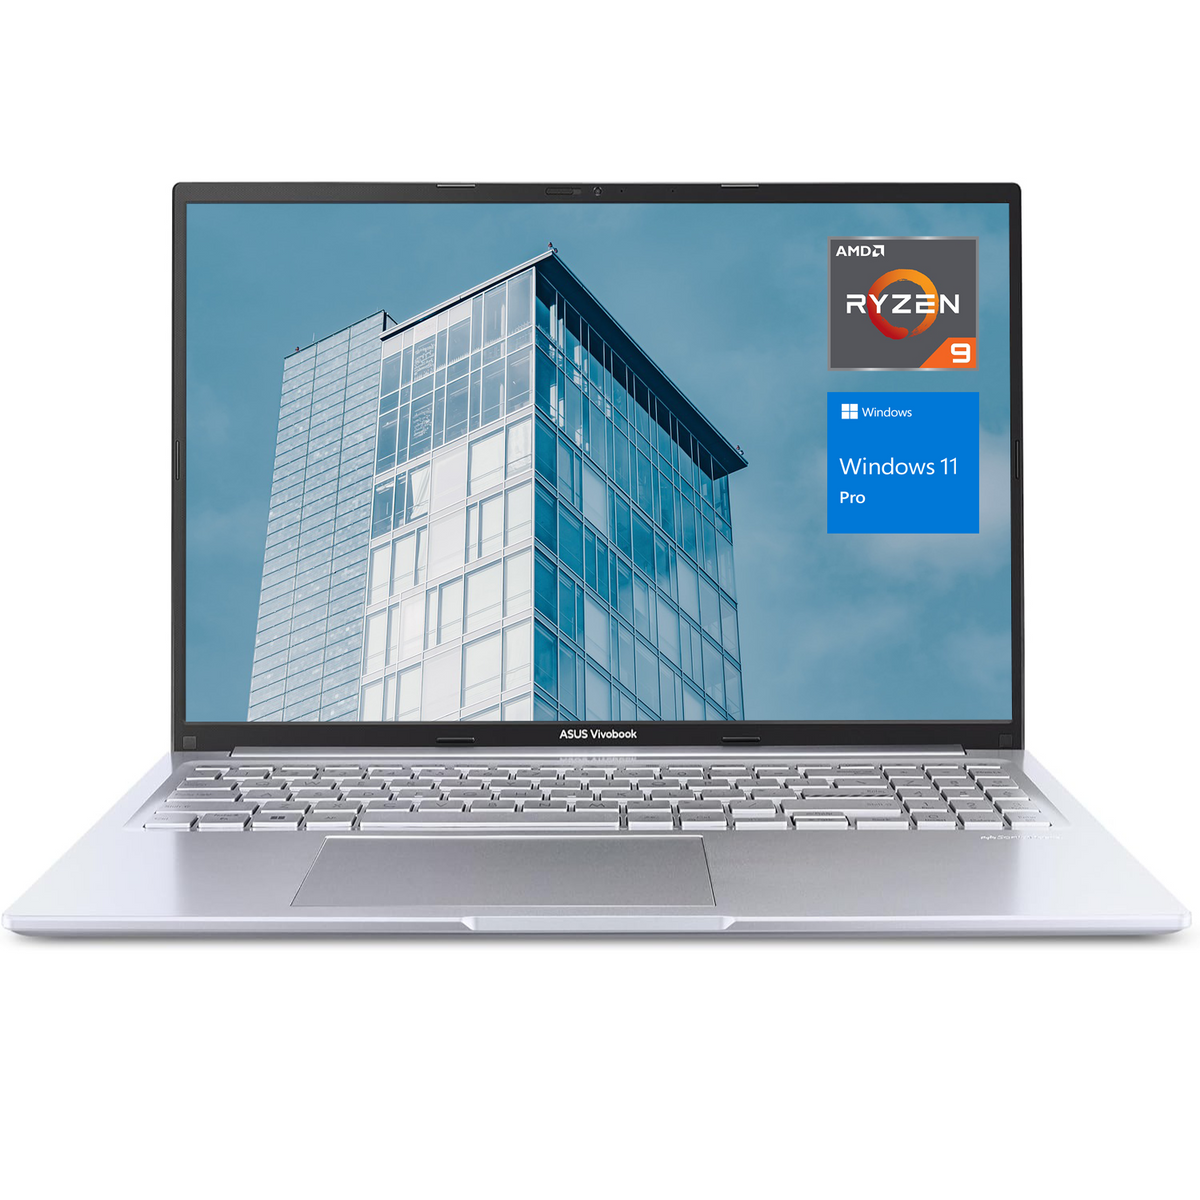 ASUS Vivobook Daily Traditional Laptop, 16" FHD+ 1920*1200 Non-touch 60Hz, AMD Ryzen 9 7940HS, AMD Radeon Graphics, 16GB DDR5 SODIMM, 1TB PCIe M.2 SSD, Wi-Fi 6, Non-RGB Backlit Keyboard, Windows 11 Home, Silver